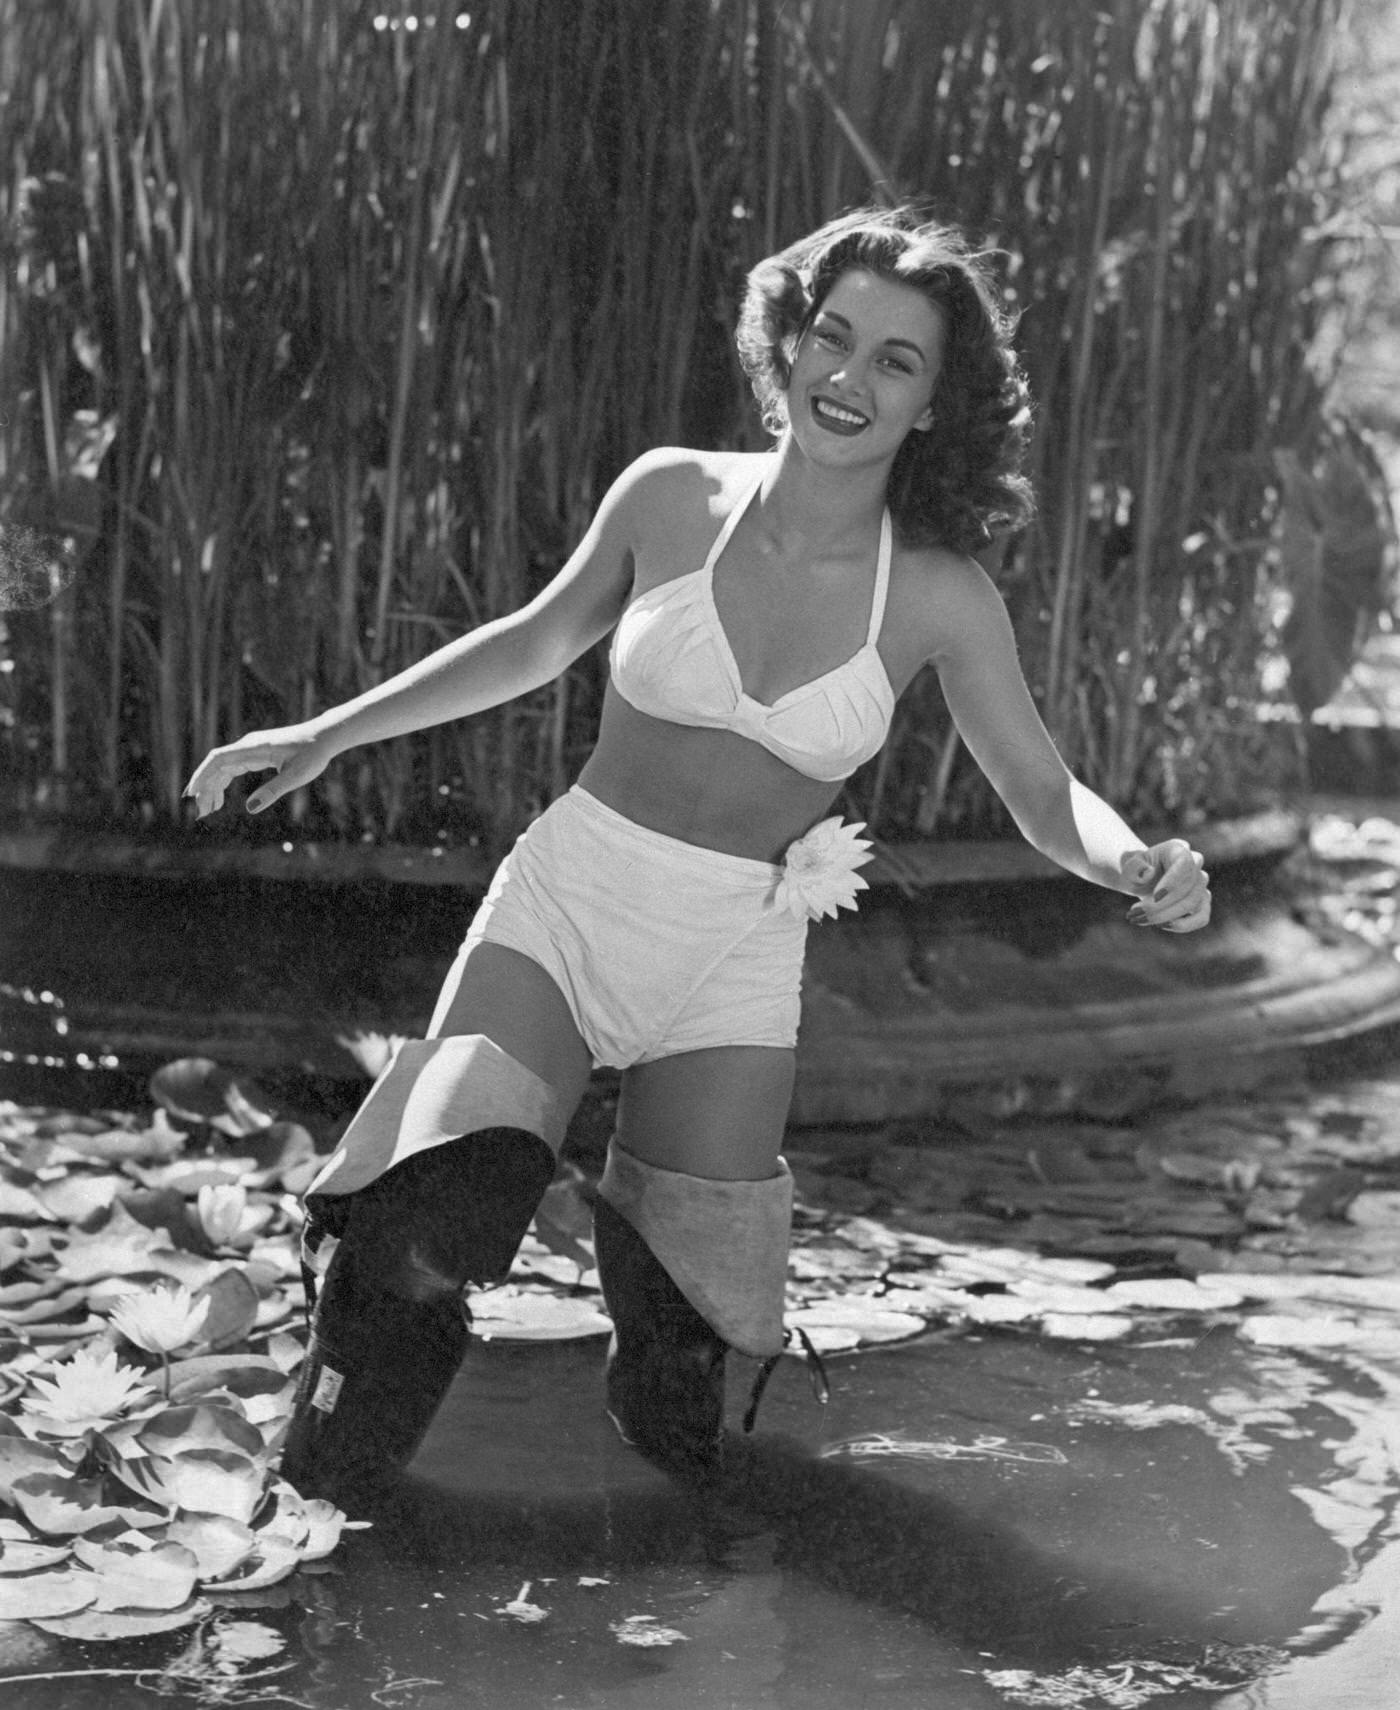 Young woman in a bikini and gumboots standing in a pond covered by water lilies, 1948.